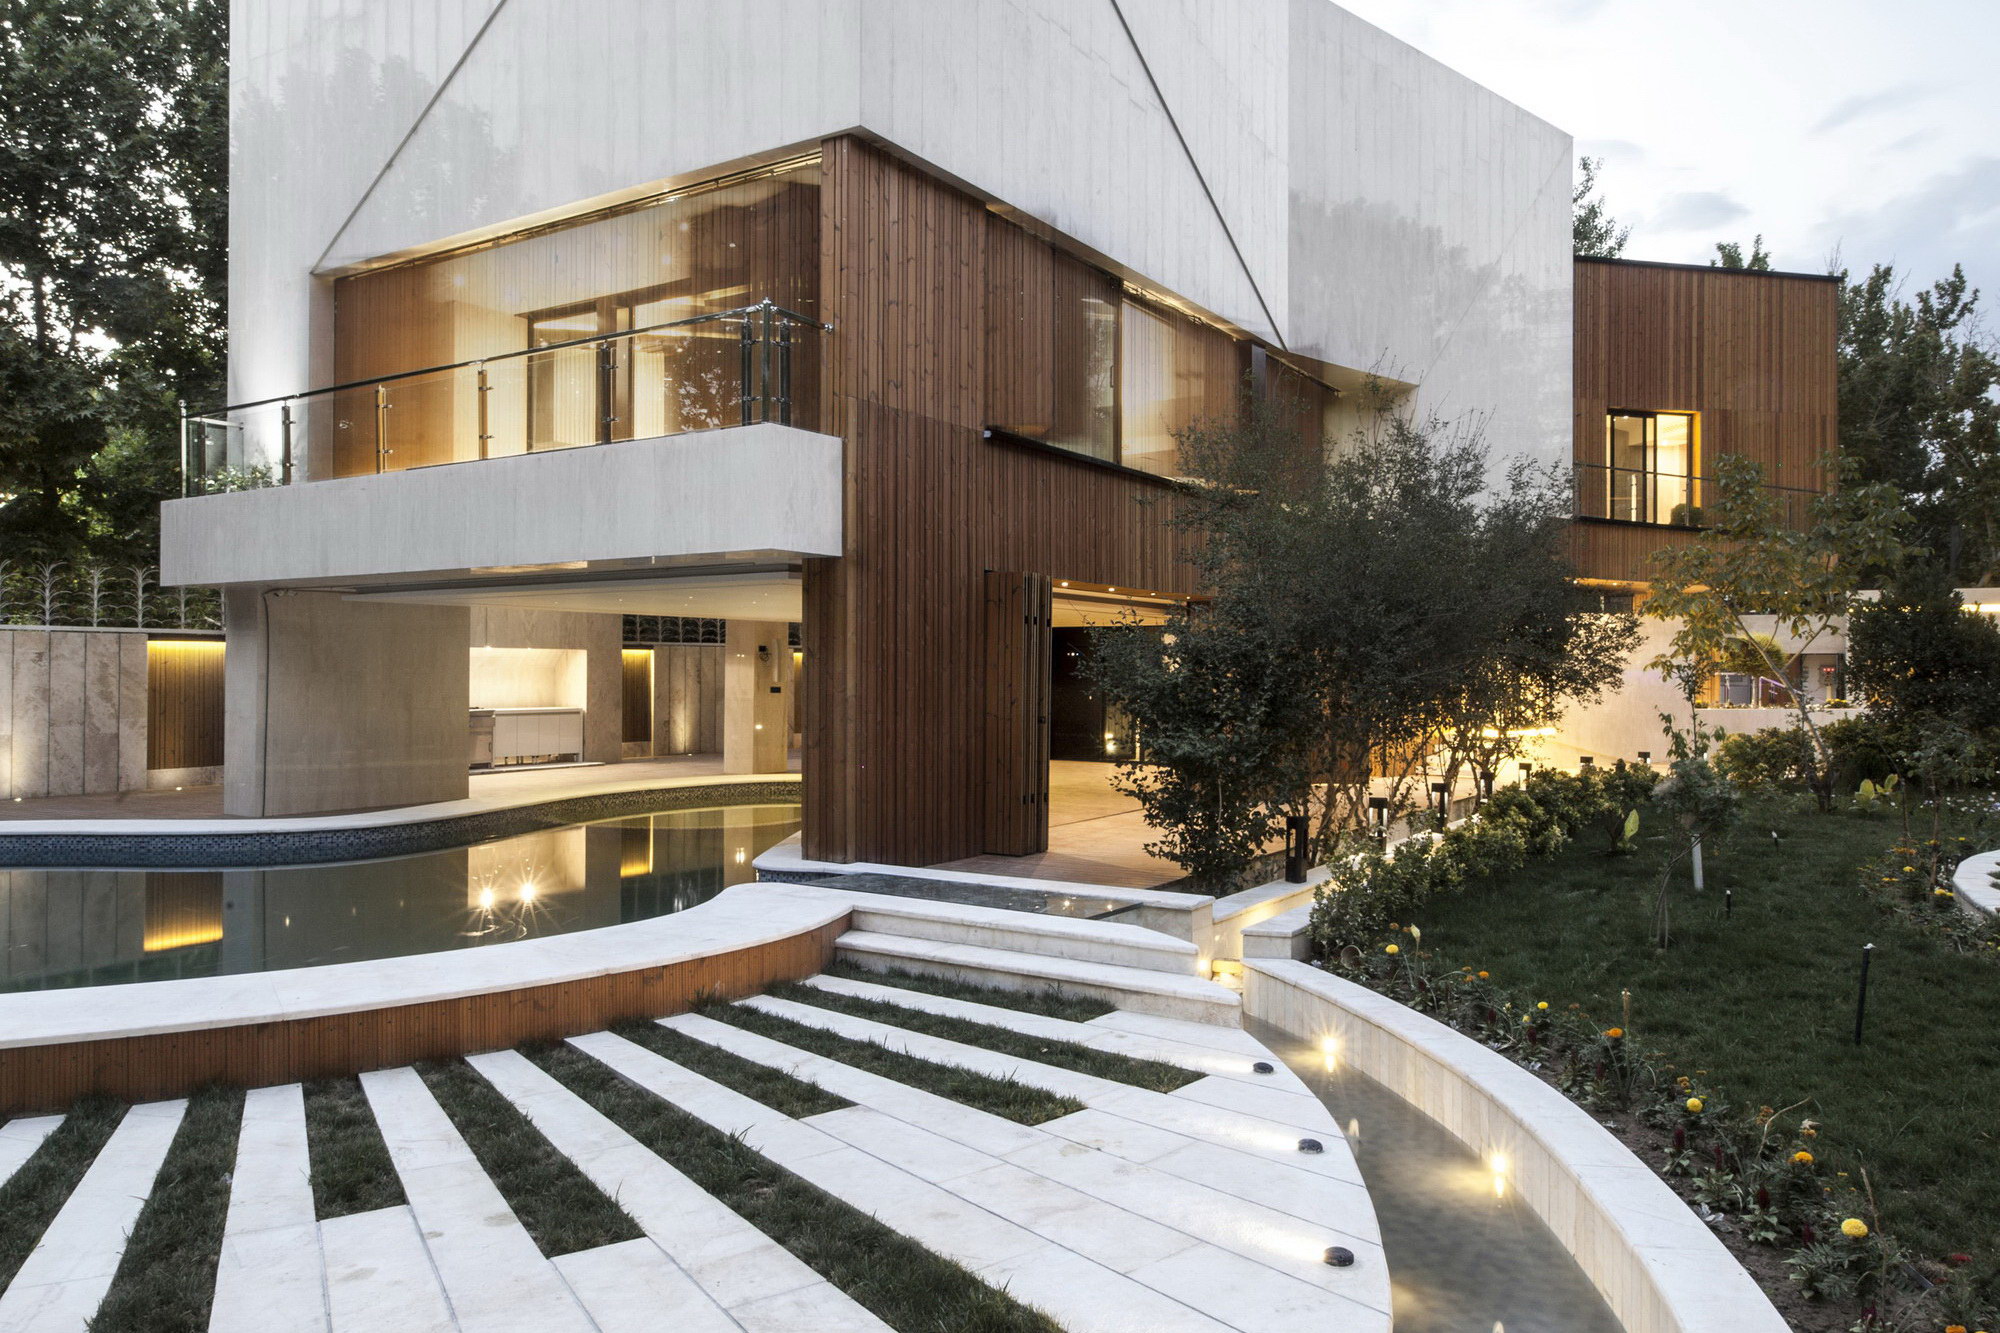 Kooshk House by Sarsayeh Architectural Office